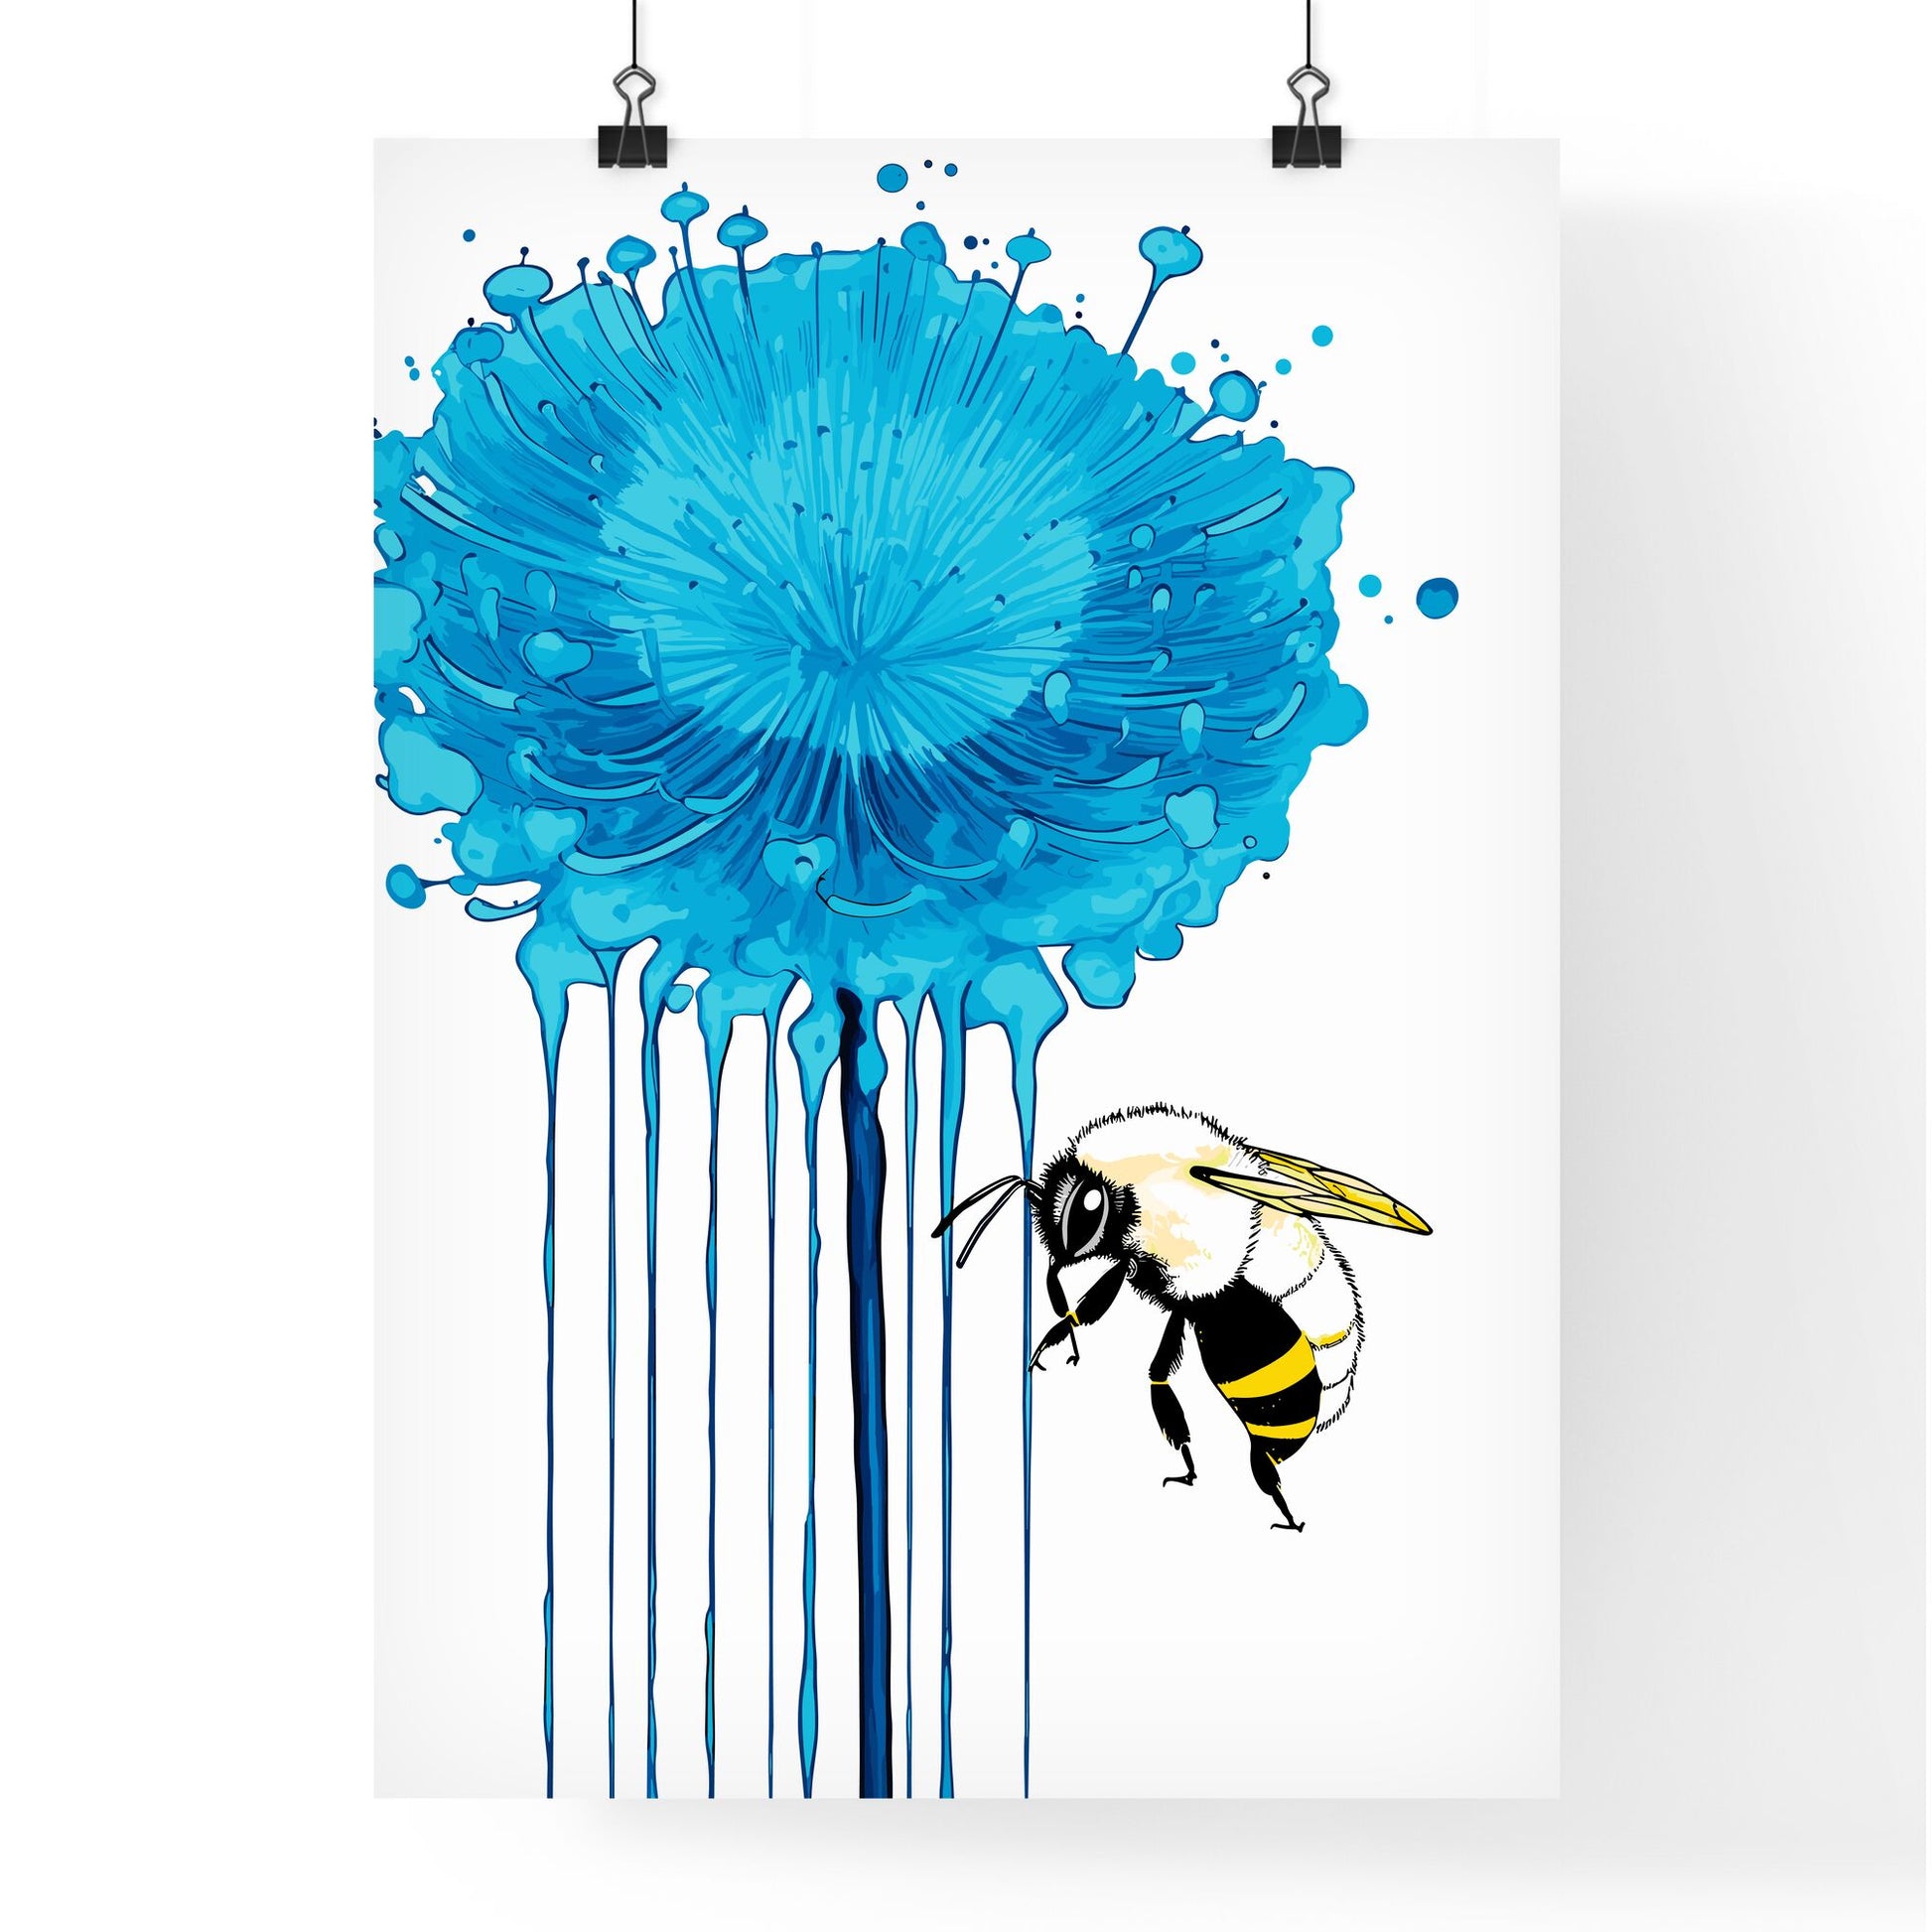 Honey Bee On A Blue Flower Pollinating - A Bee On A Flower Default Title